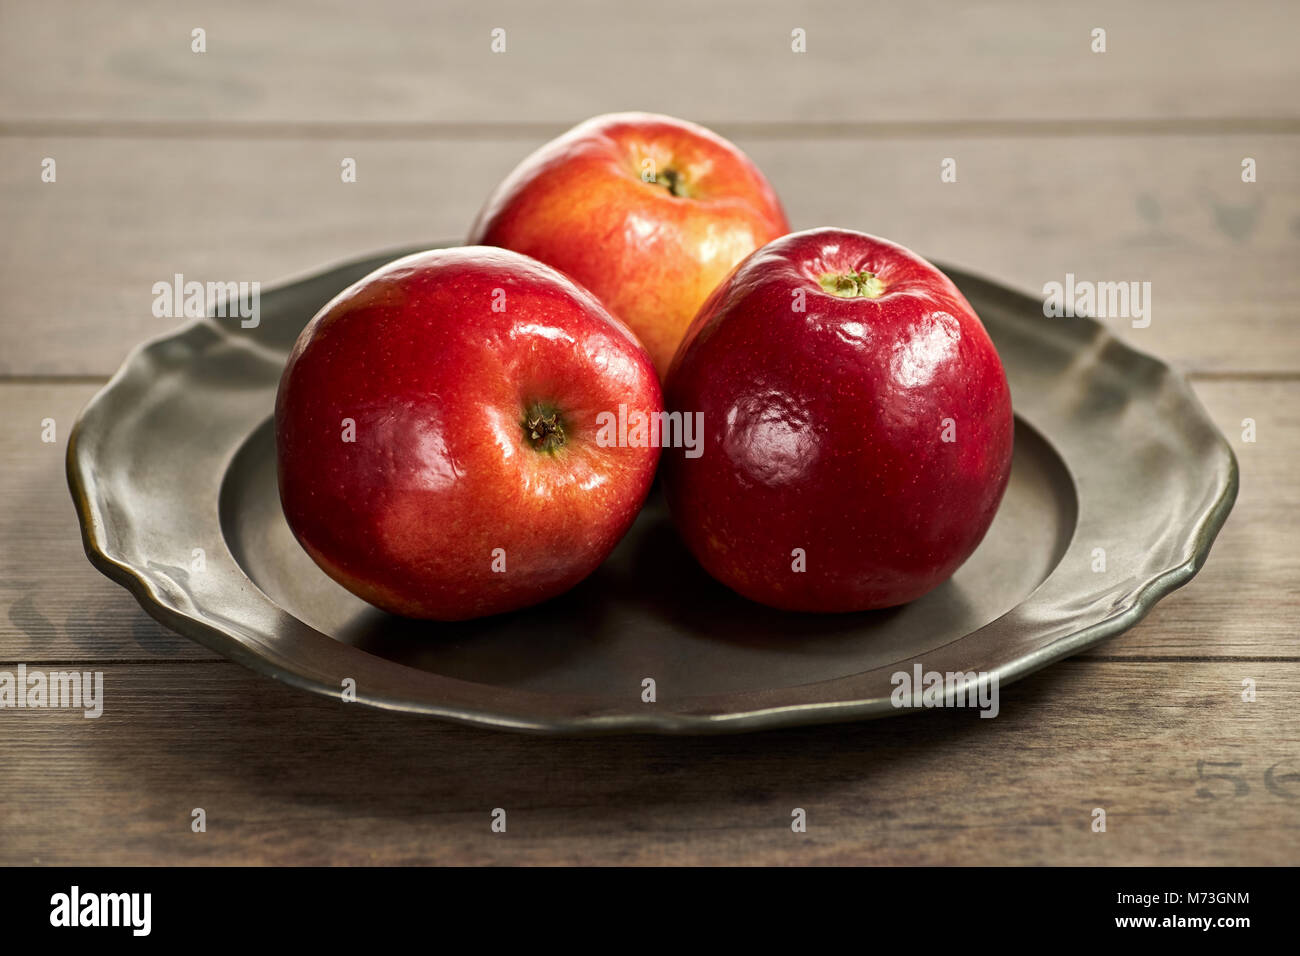 Three red apples on a metal plate Stock Photo